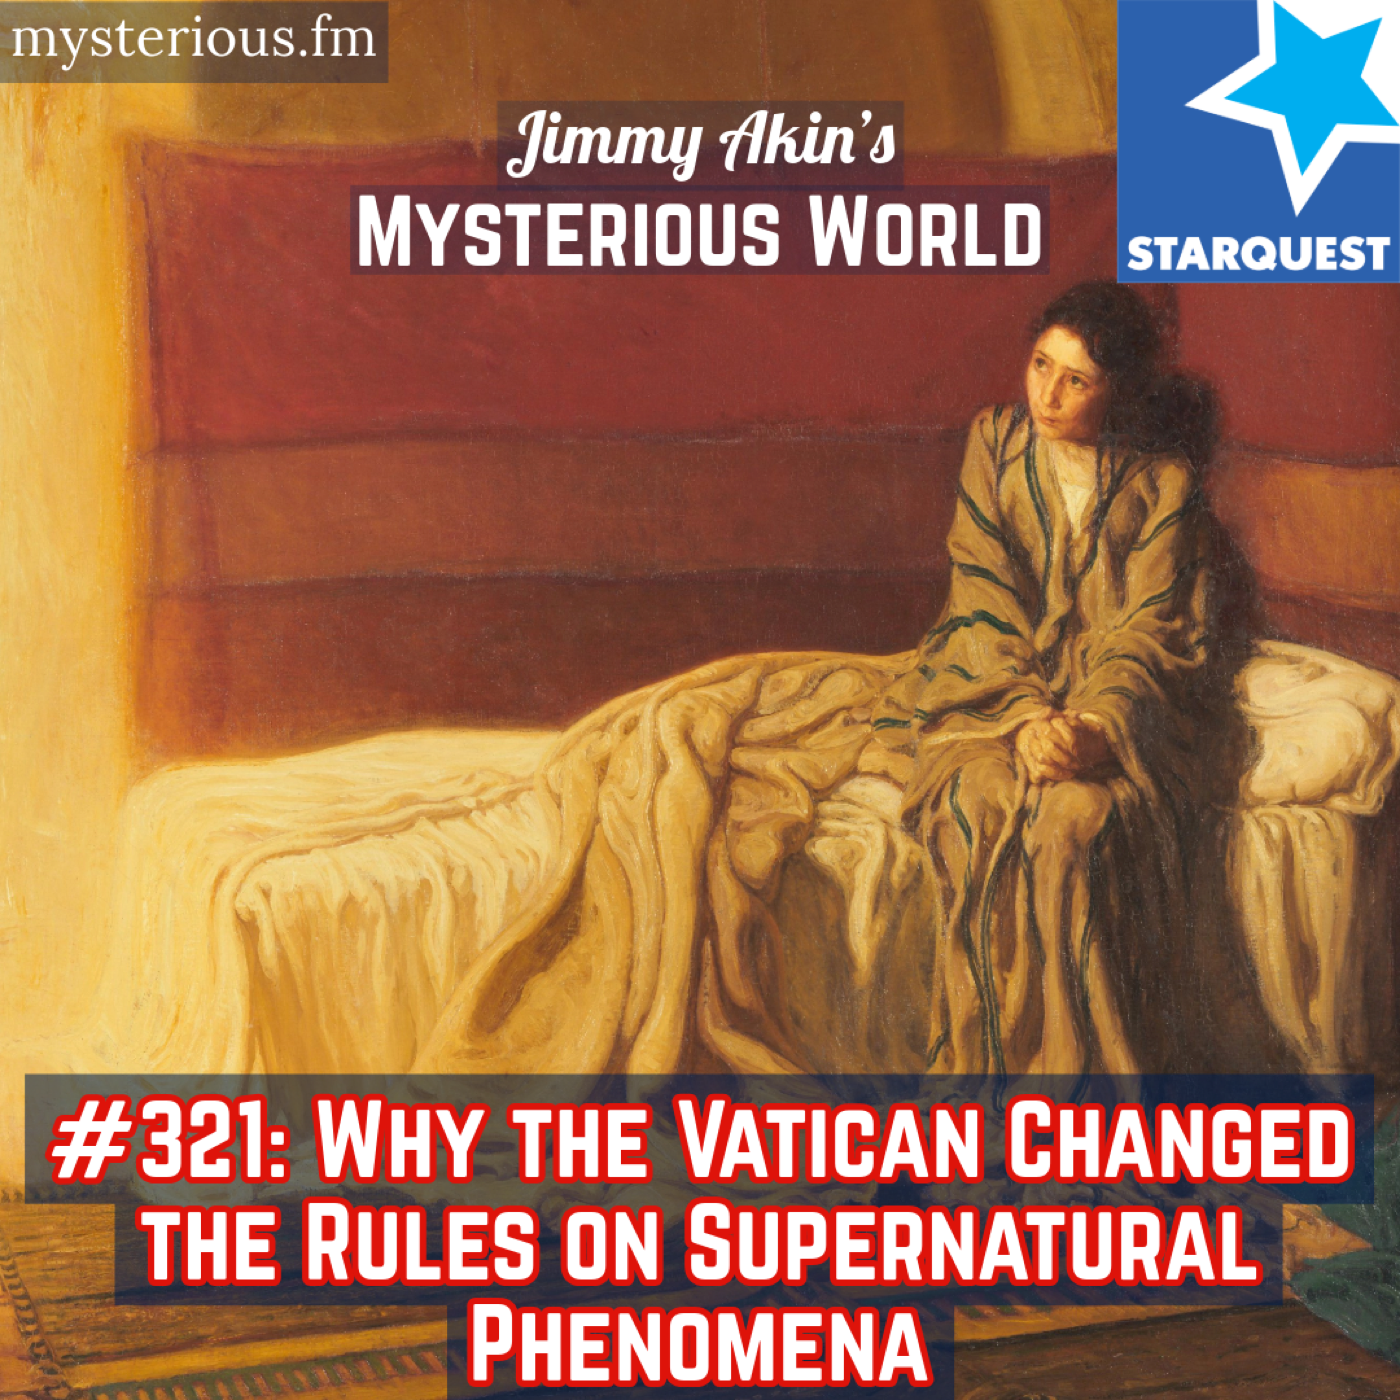 Why the Vatican Changed Its Rules for Evaluating Supernatural Phenomena (Apparitions, Visions, Eucharistic Miracles, Catholic, Vatican, Dicastery for the Doctrine of the Faith)